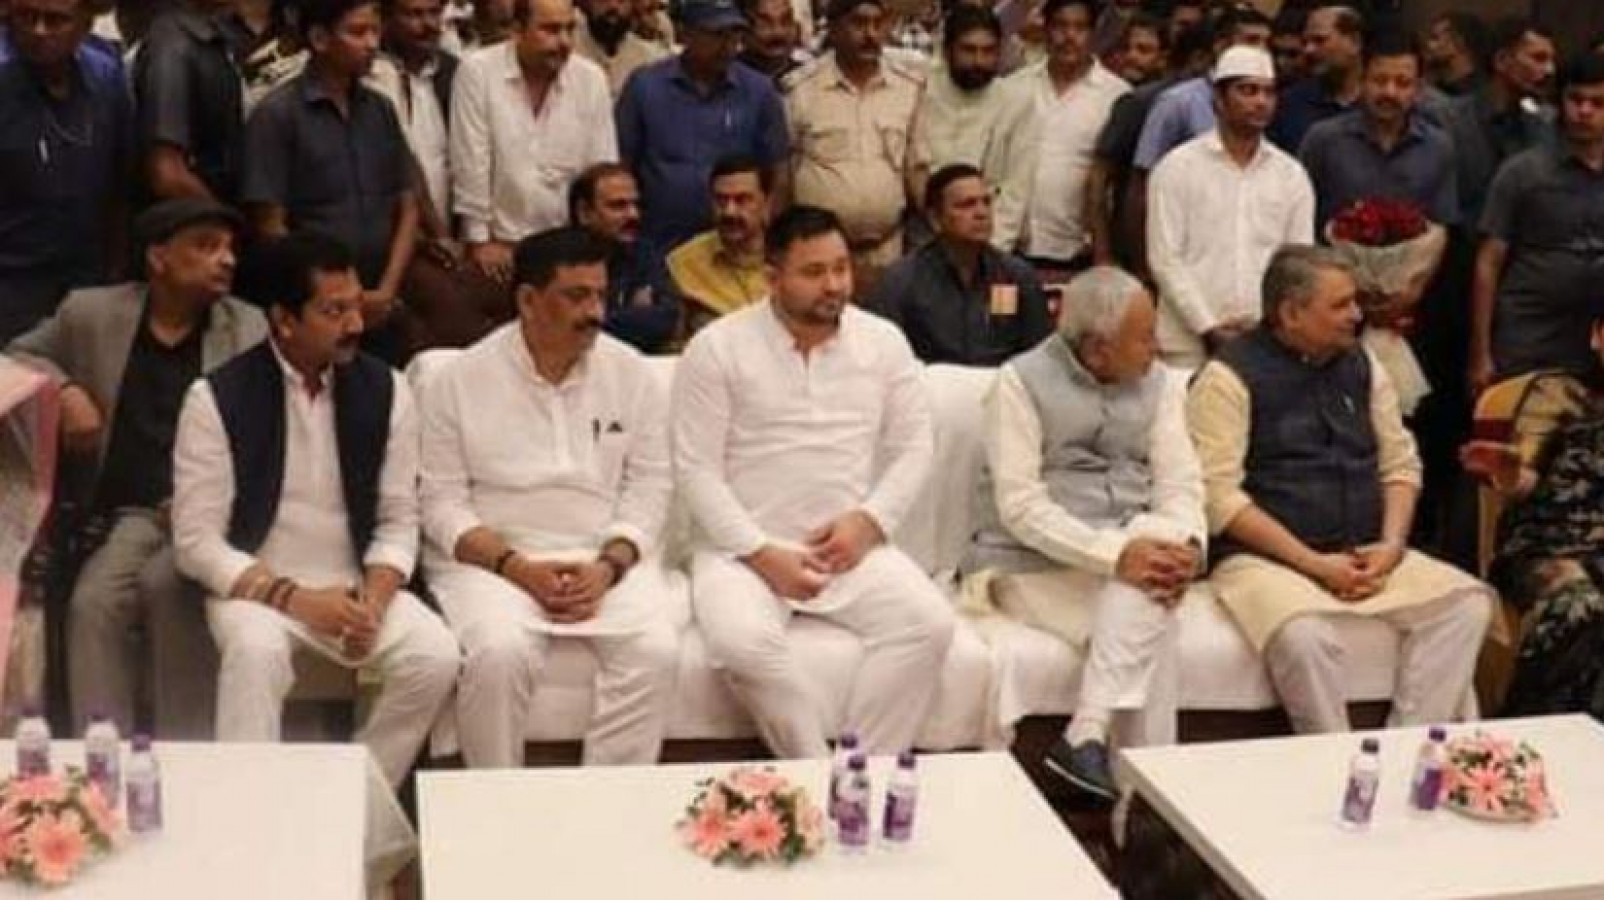 Baahubali' Anand Mohan Singh's recent photos with family, Bihar leaders